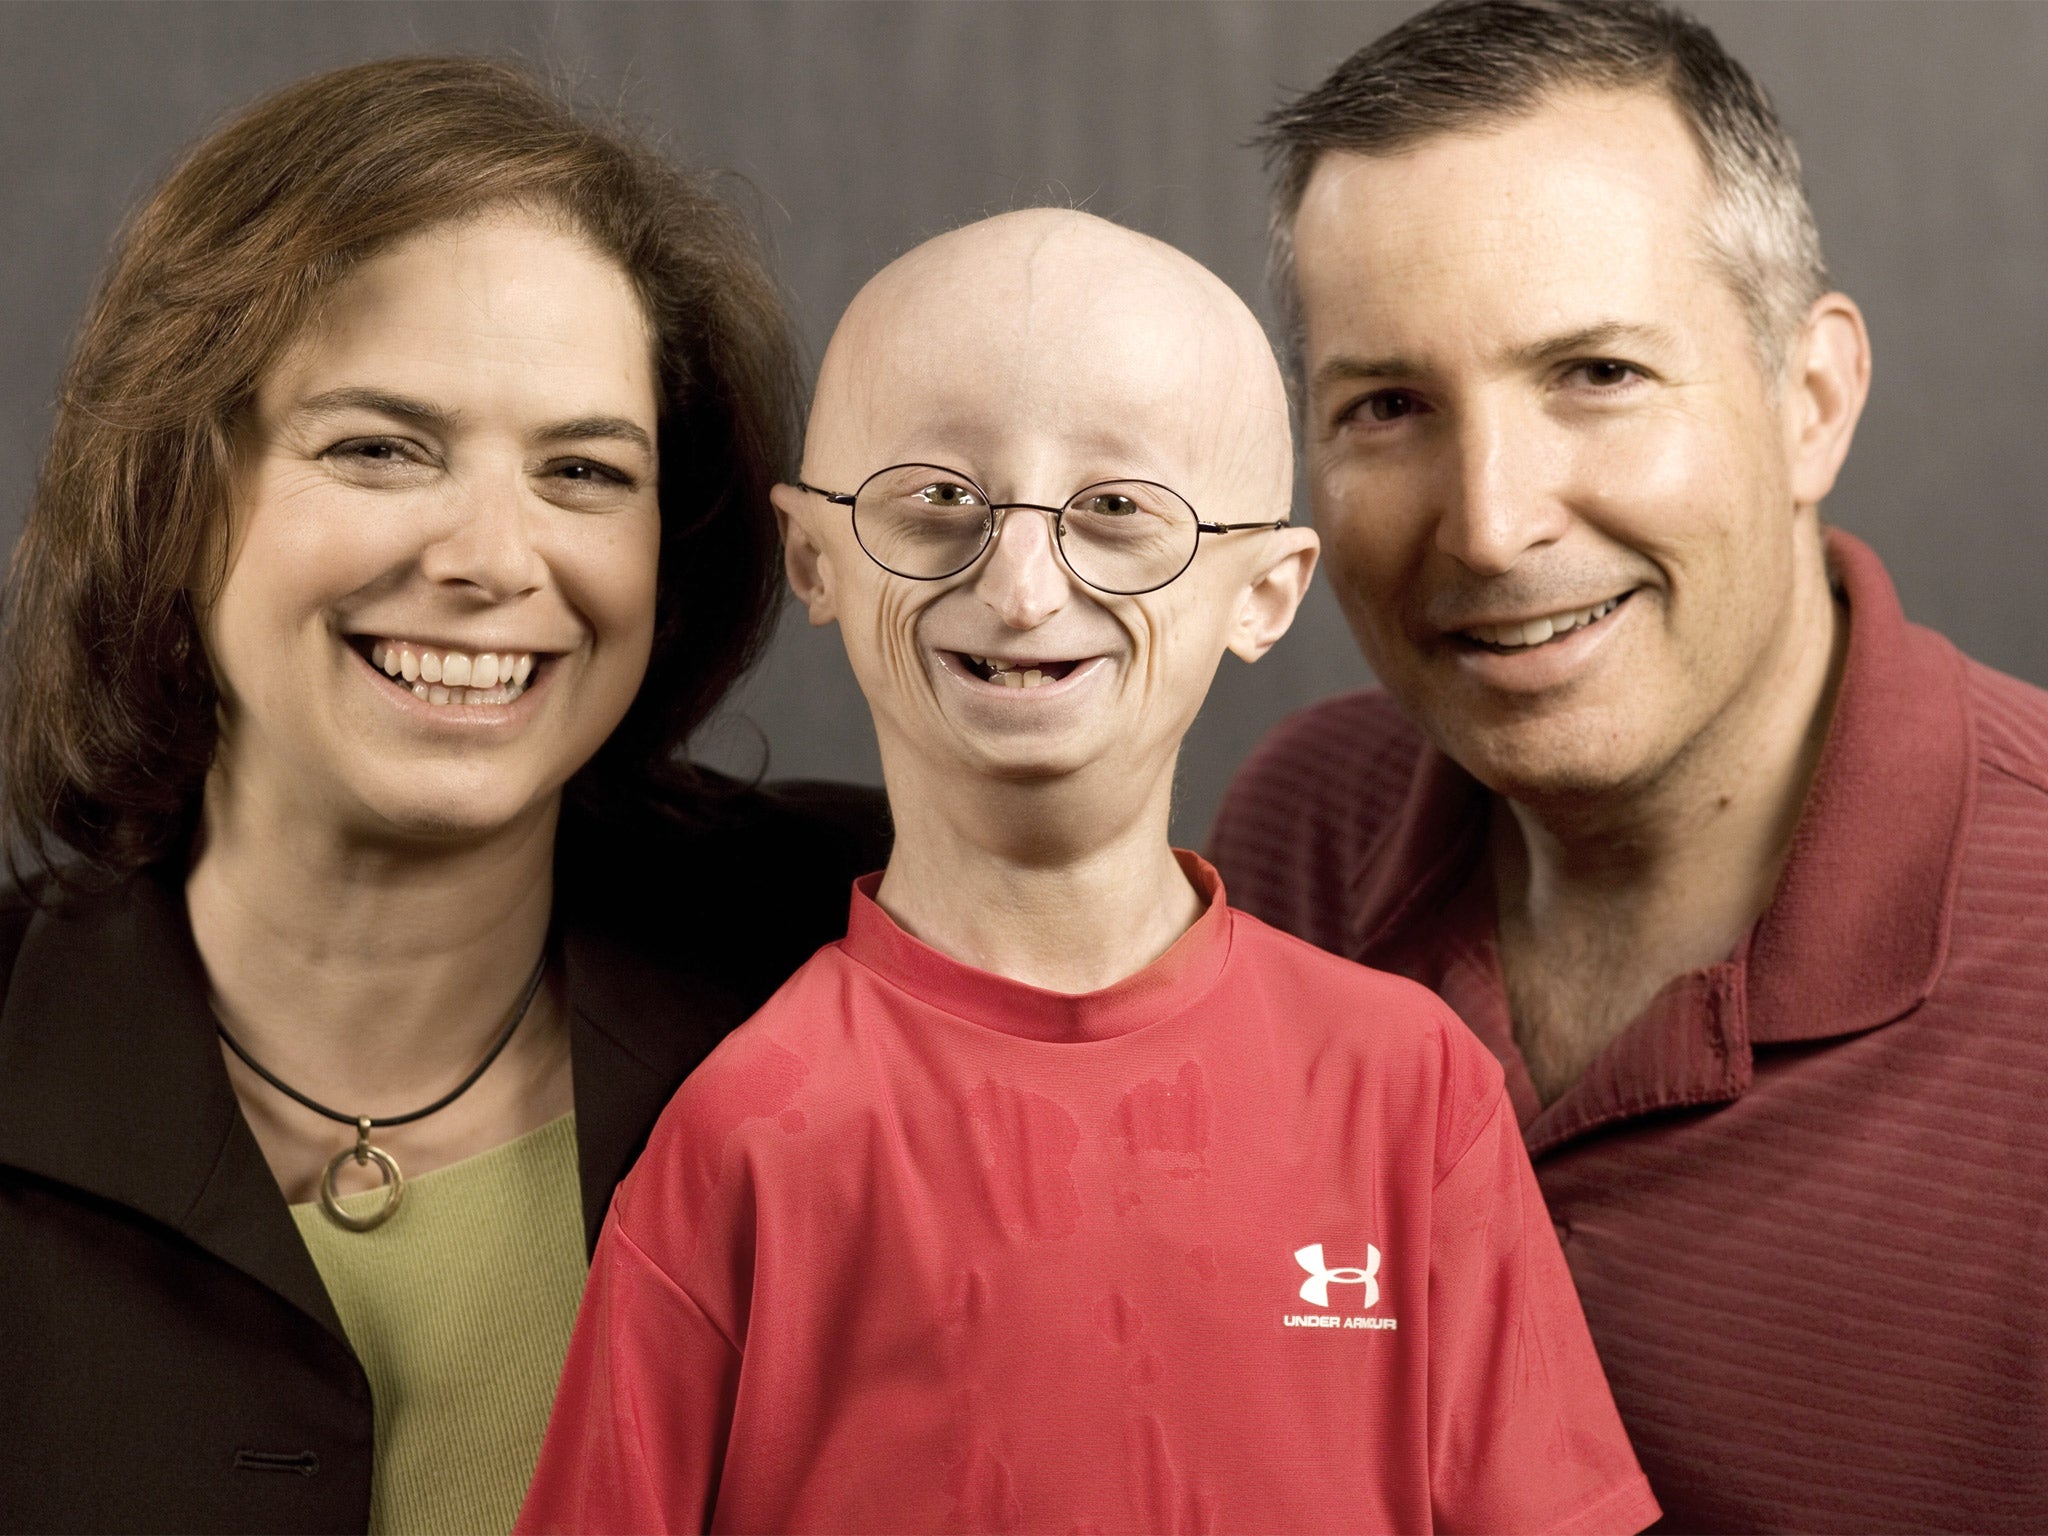 Sam Berns with his parents in March 2009, when he was 12 years old